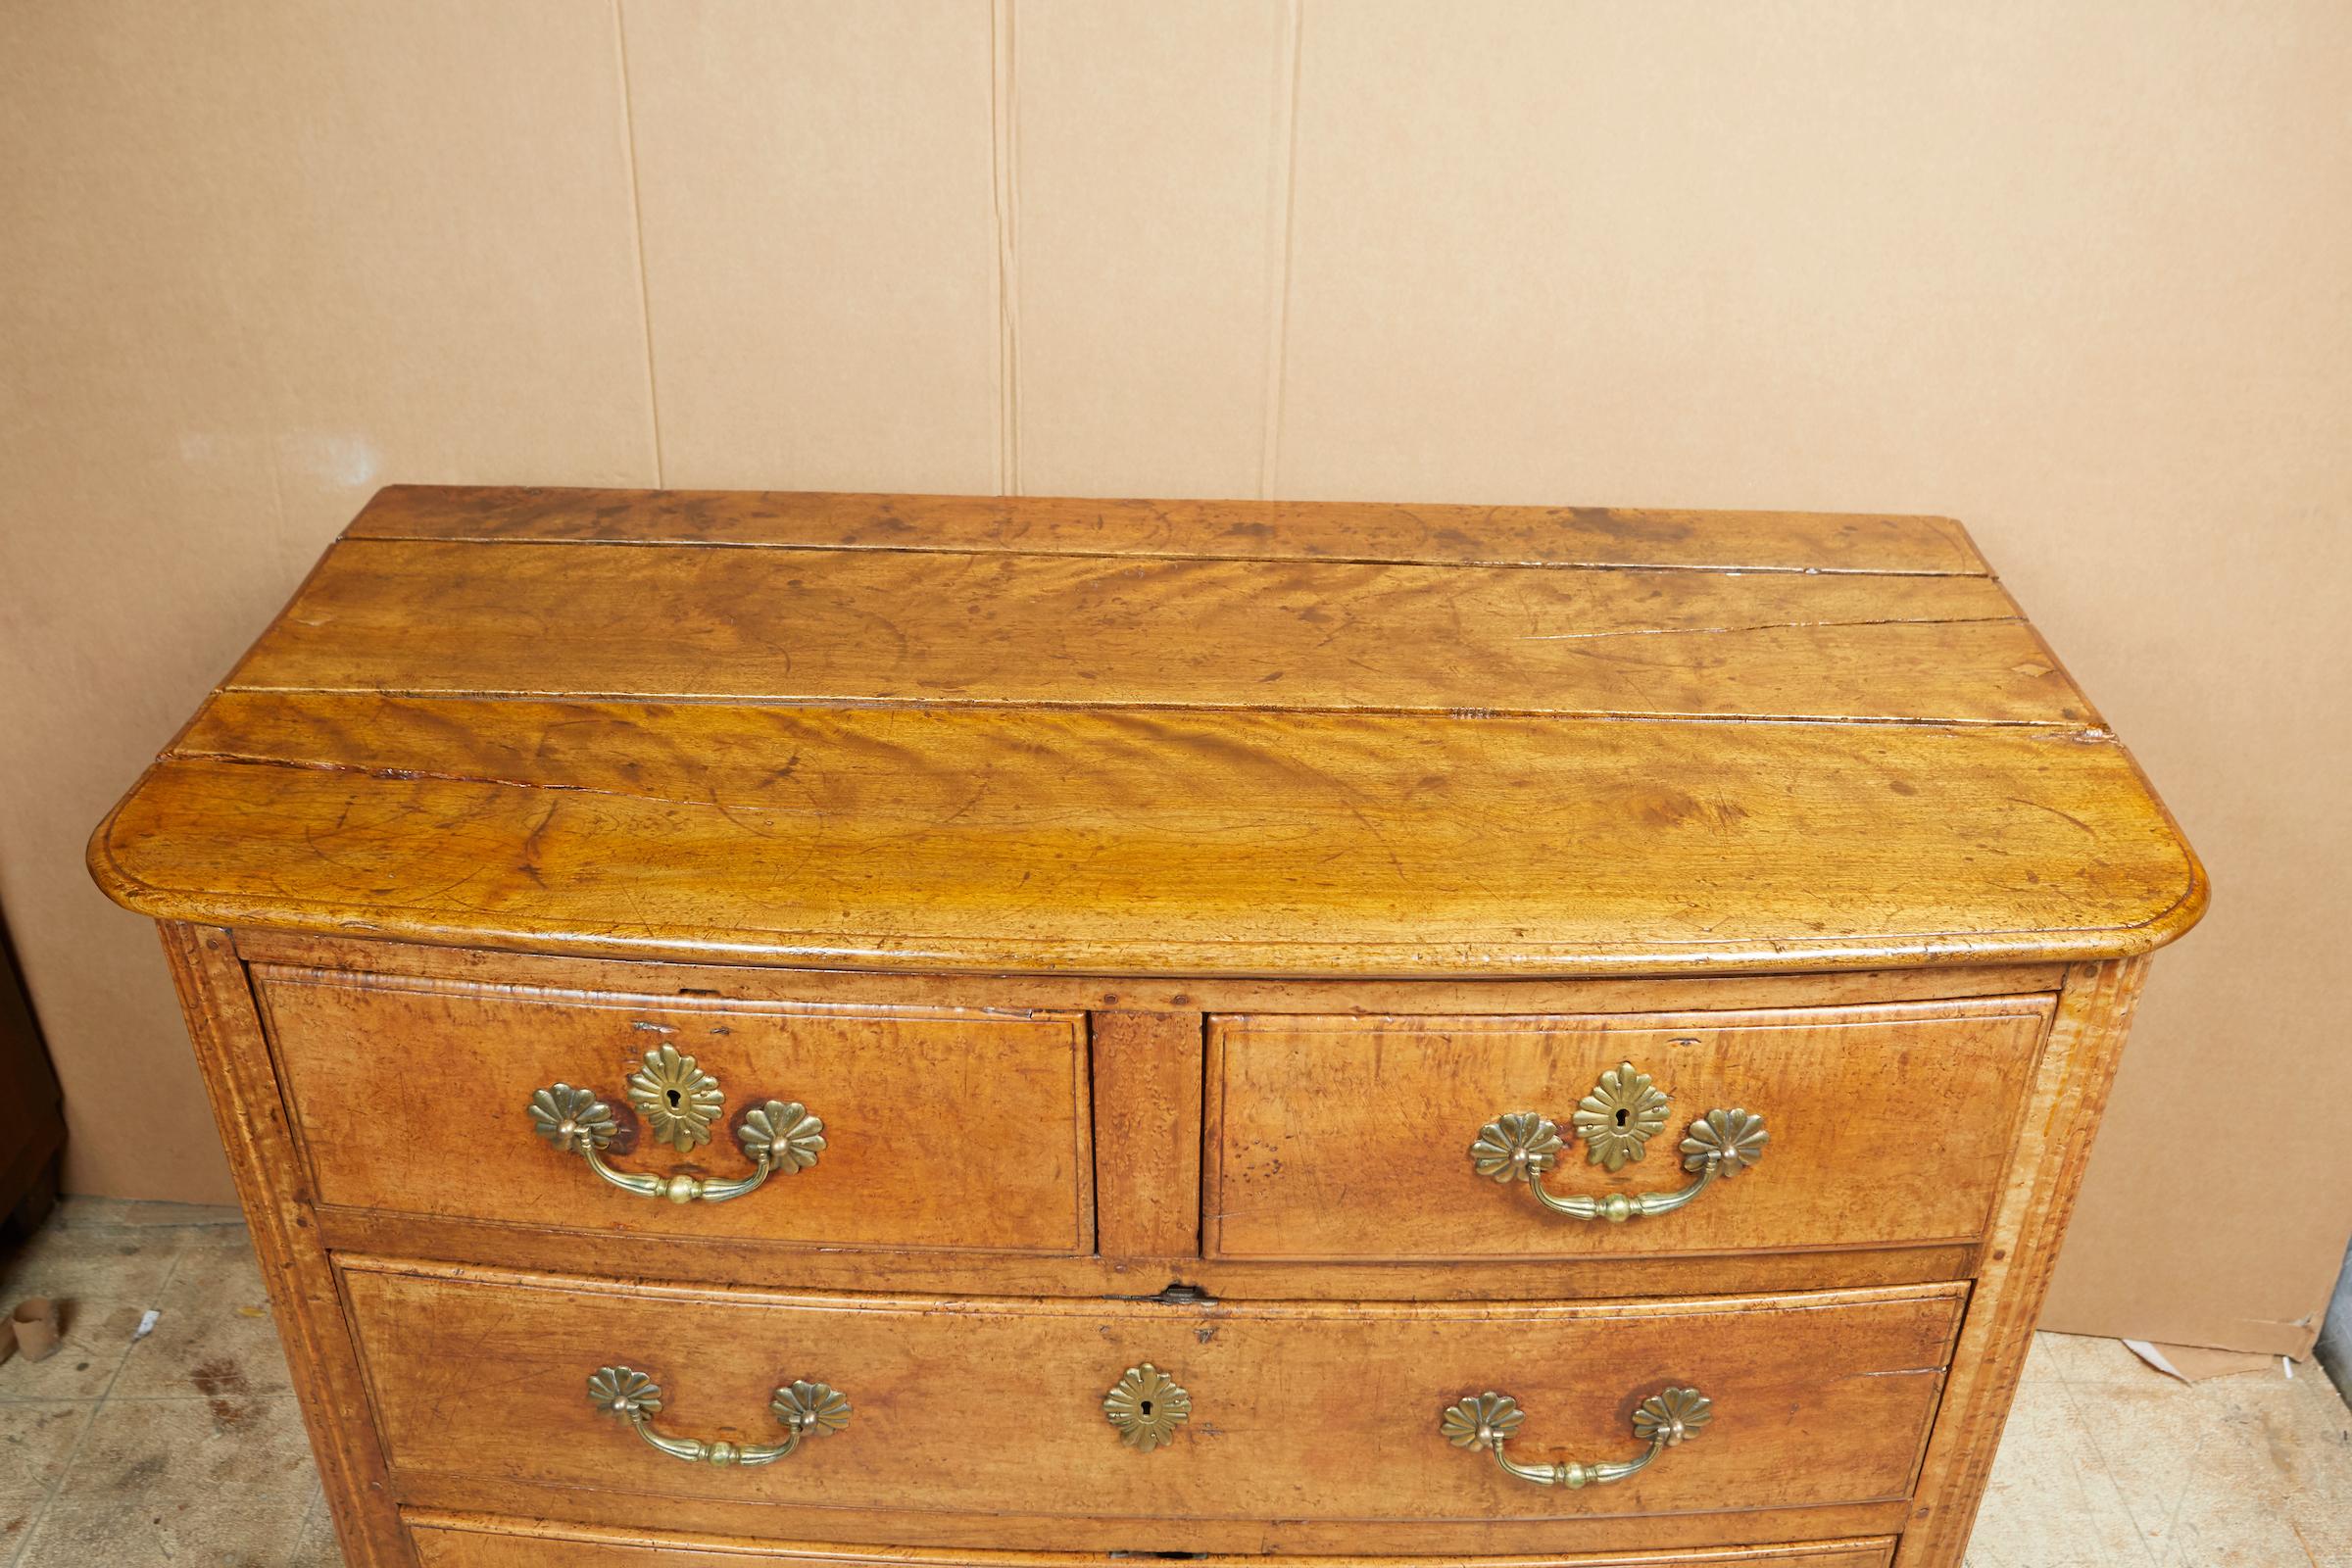 Extremely rare 18th century bird's-eye maple Regence style French Canadian commode
Québec.